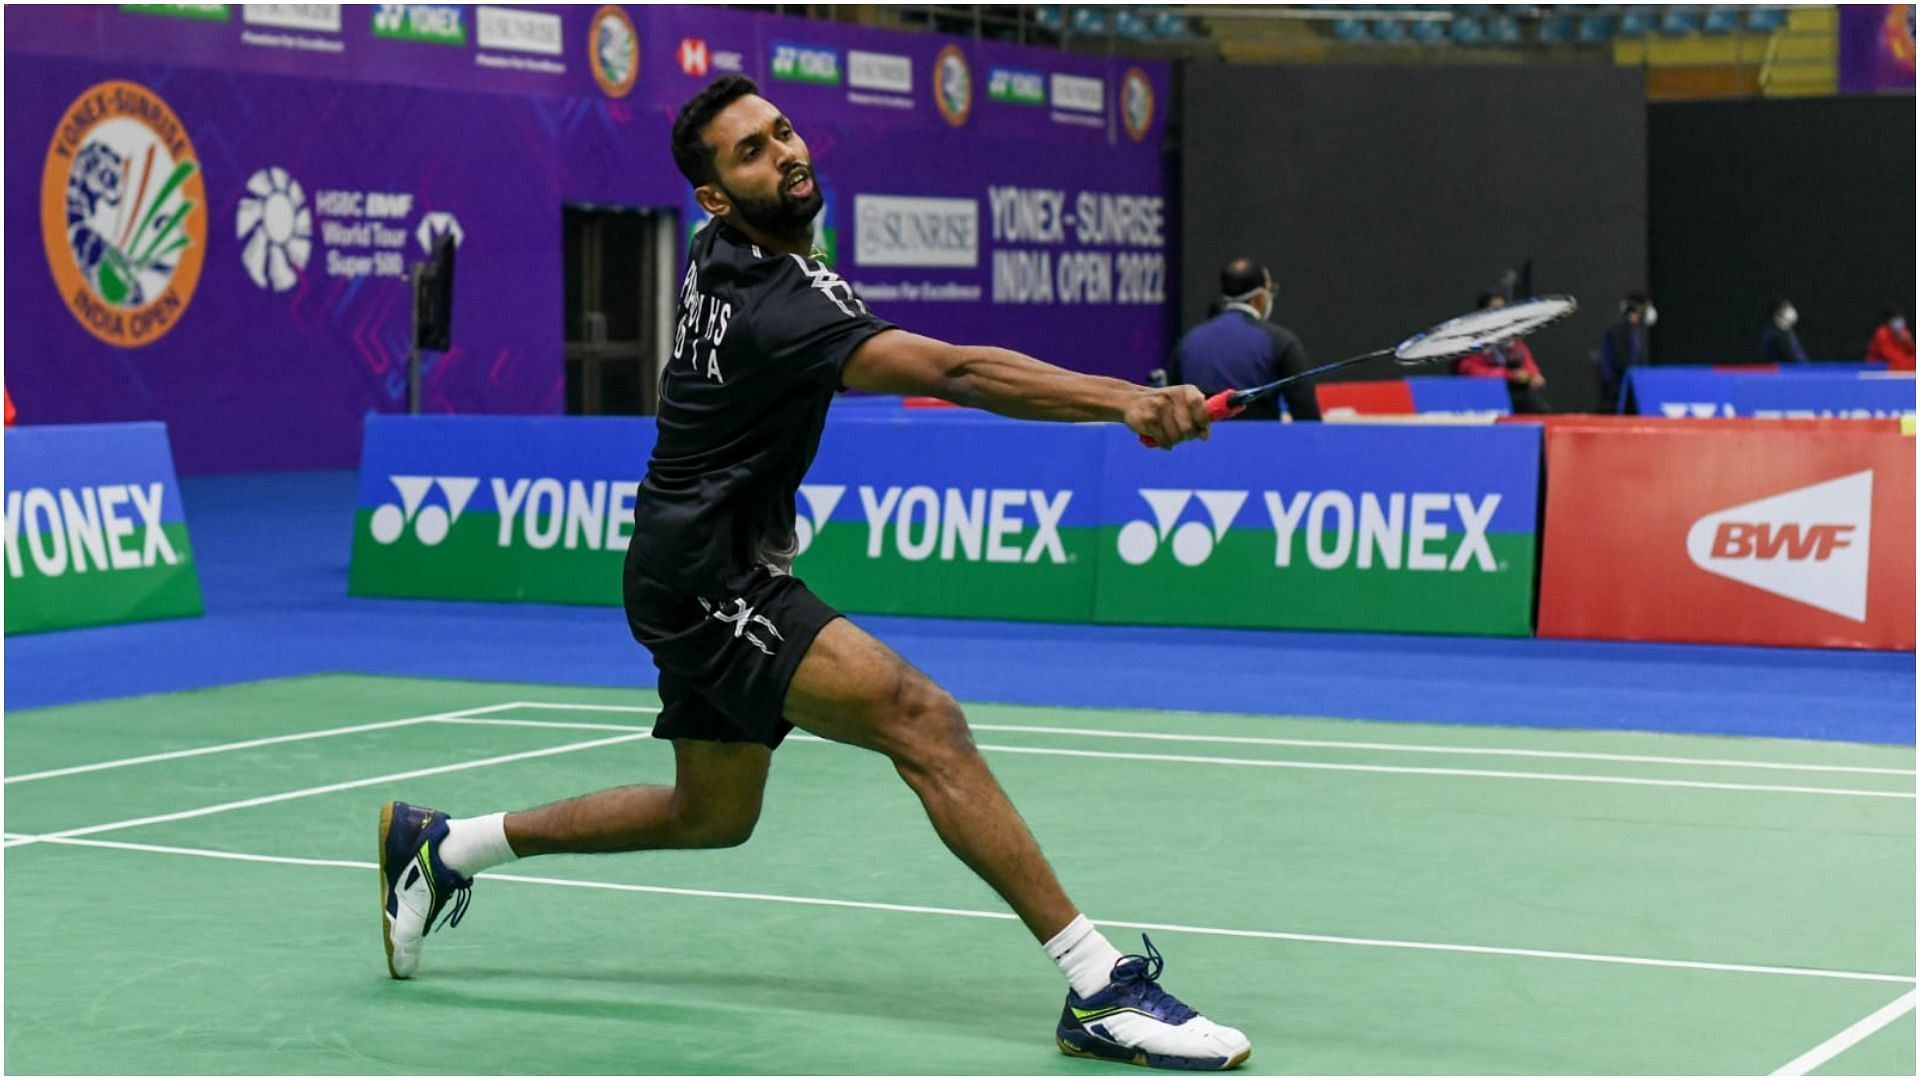 HS Prannoy in action at Yonex Sunrise India Open 2022 (Pic Credit: BWF)